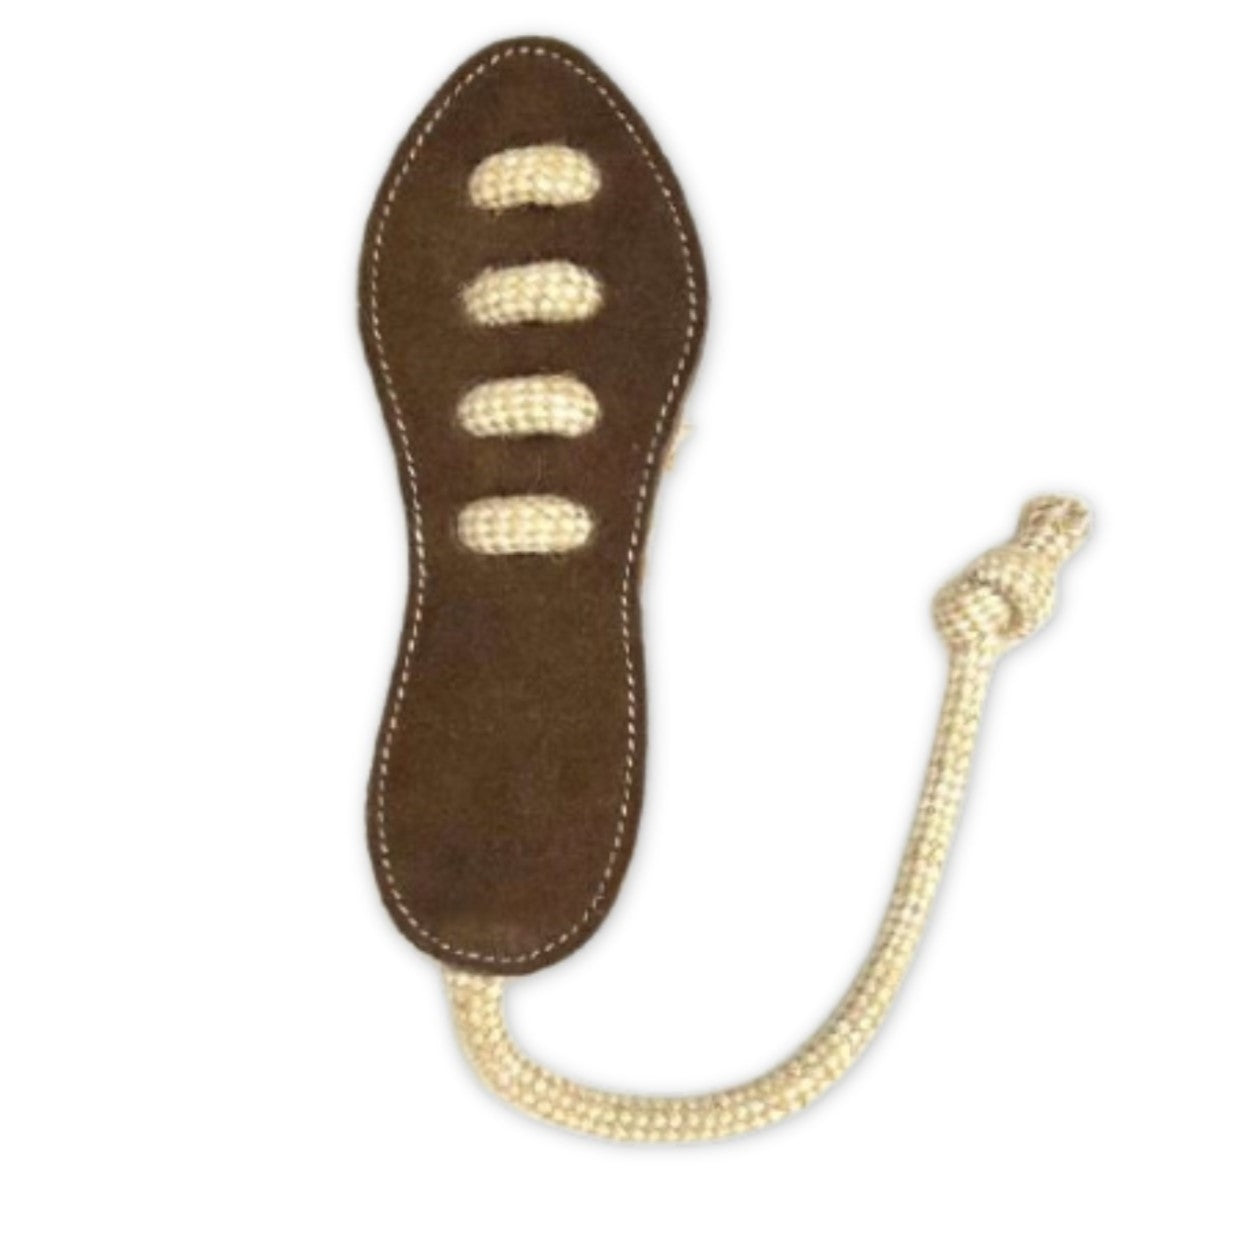 A brown buffalo leather fabric cutout mimicking a Footy Boot - chicory with white lace loops, positioned alongside a real white shoelace, arranged to suggest the idea of a shoe being laced, laid on a Georgie Paws.